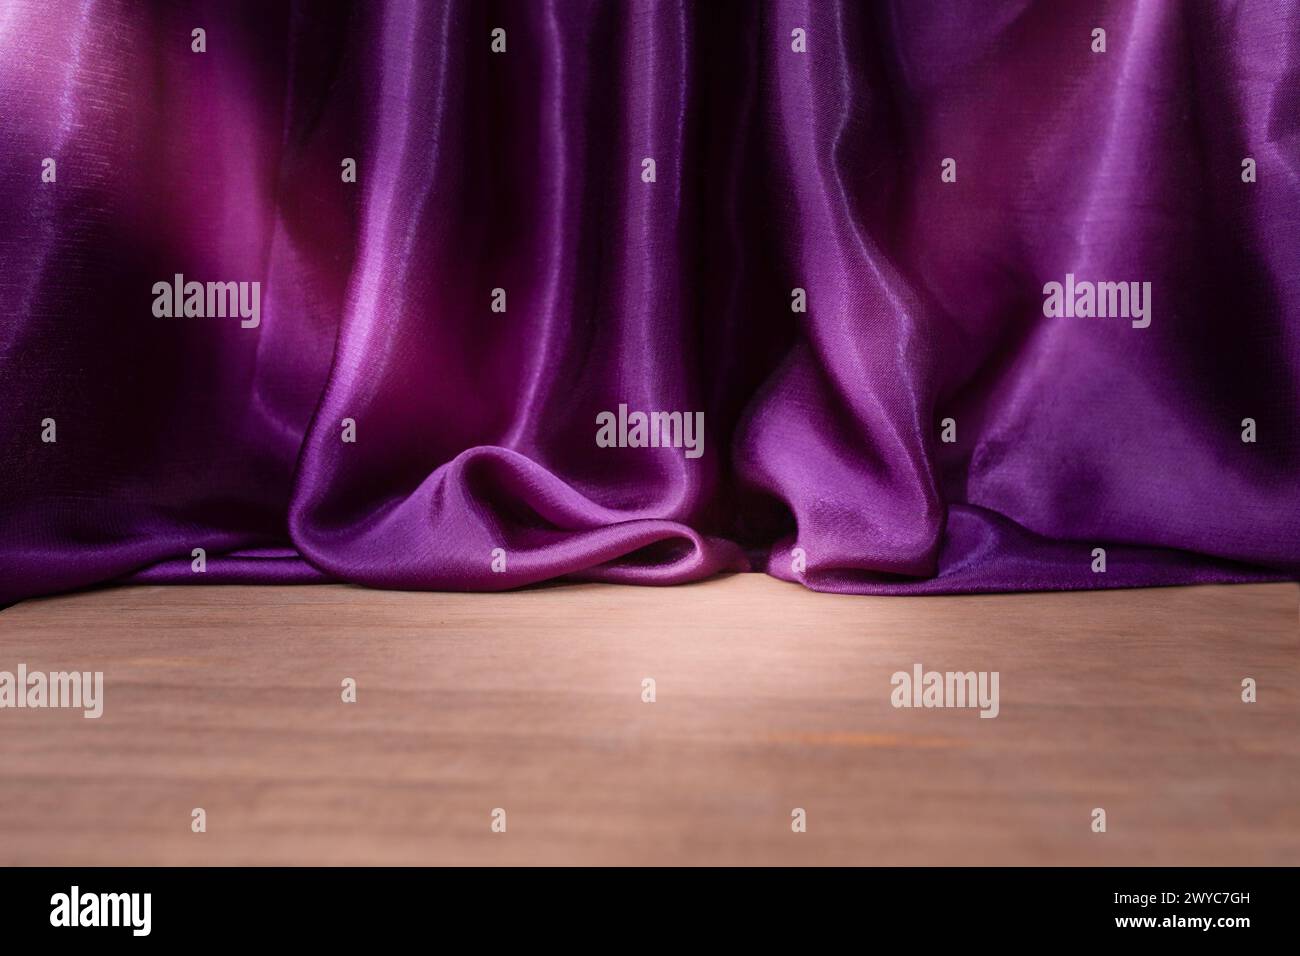 Empty wooden floor with Elegant wavy purple satin cloth curtains, defocused in the background, product placement backdrop Stock Photo